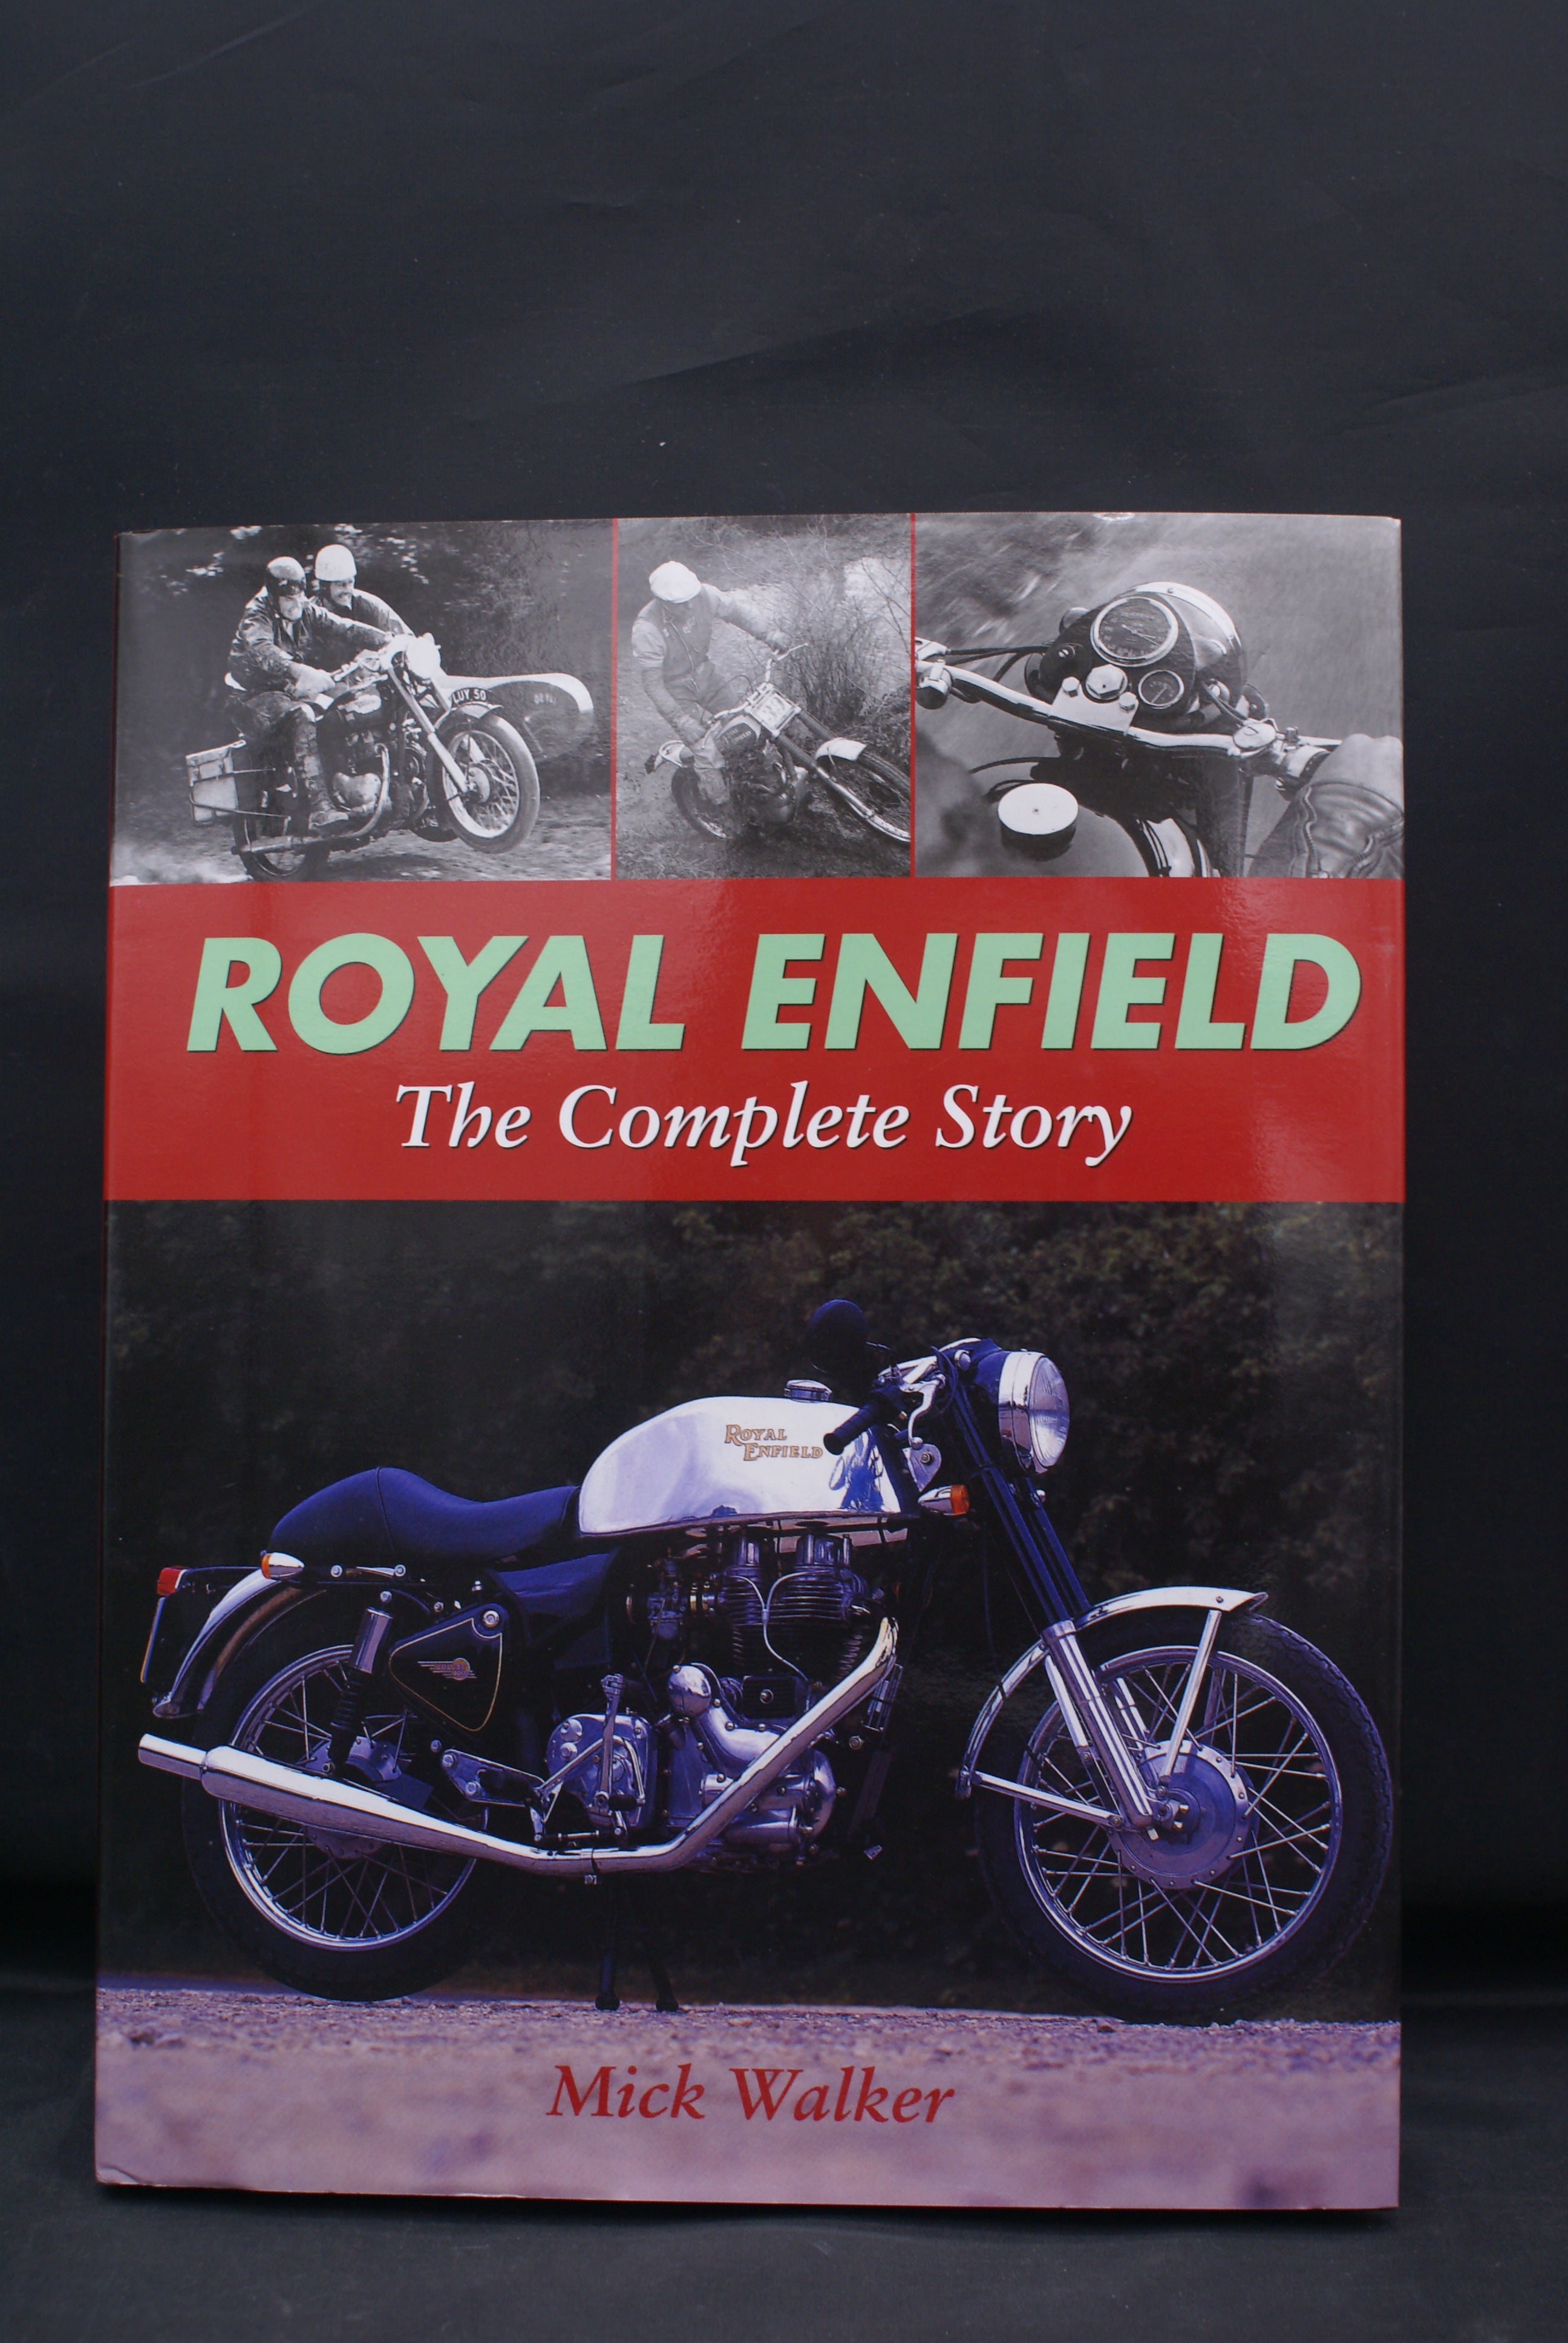 Royal Enfield, The Complete Story